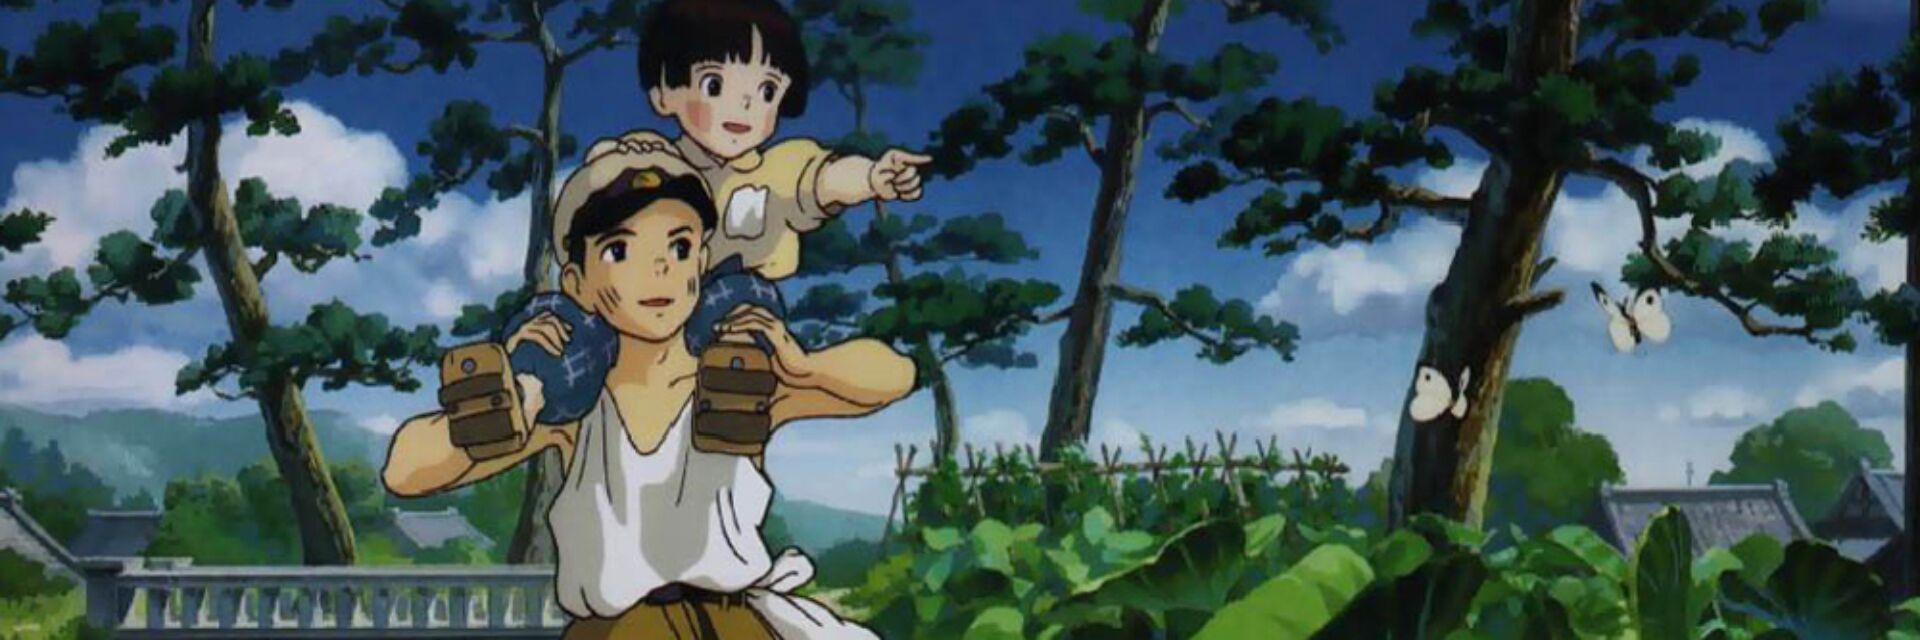 Studio Ghibli's 'Grave of the Fireflies': A Devastating and